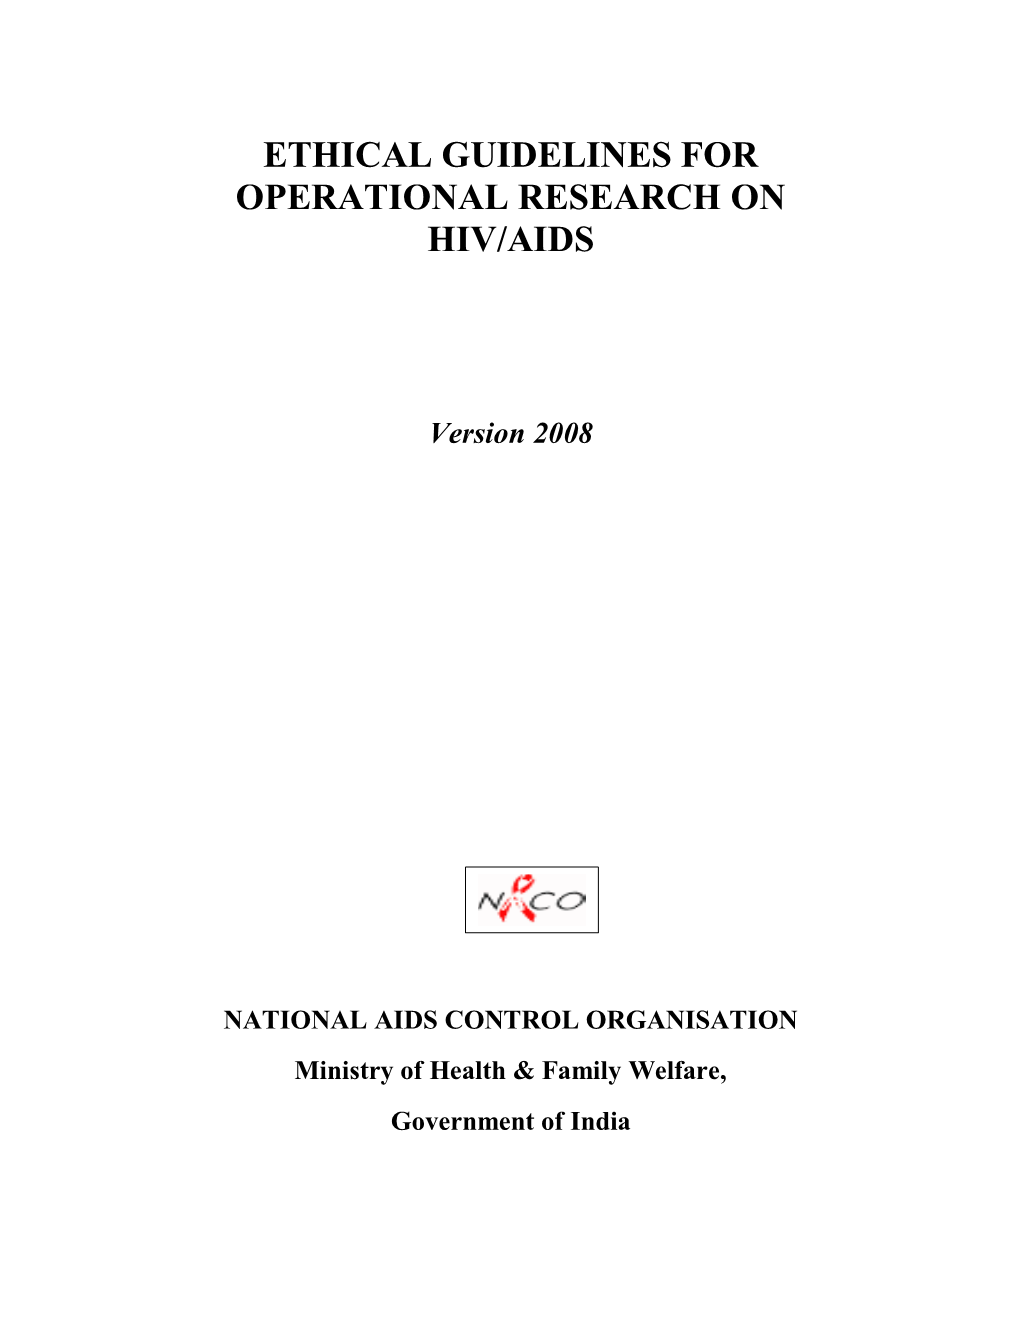 NACO Ethical Guidelines for Operational Research